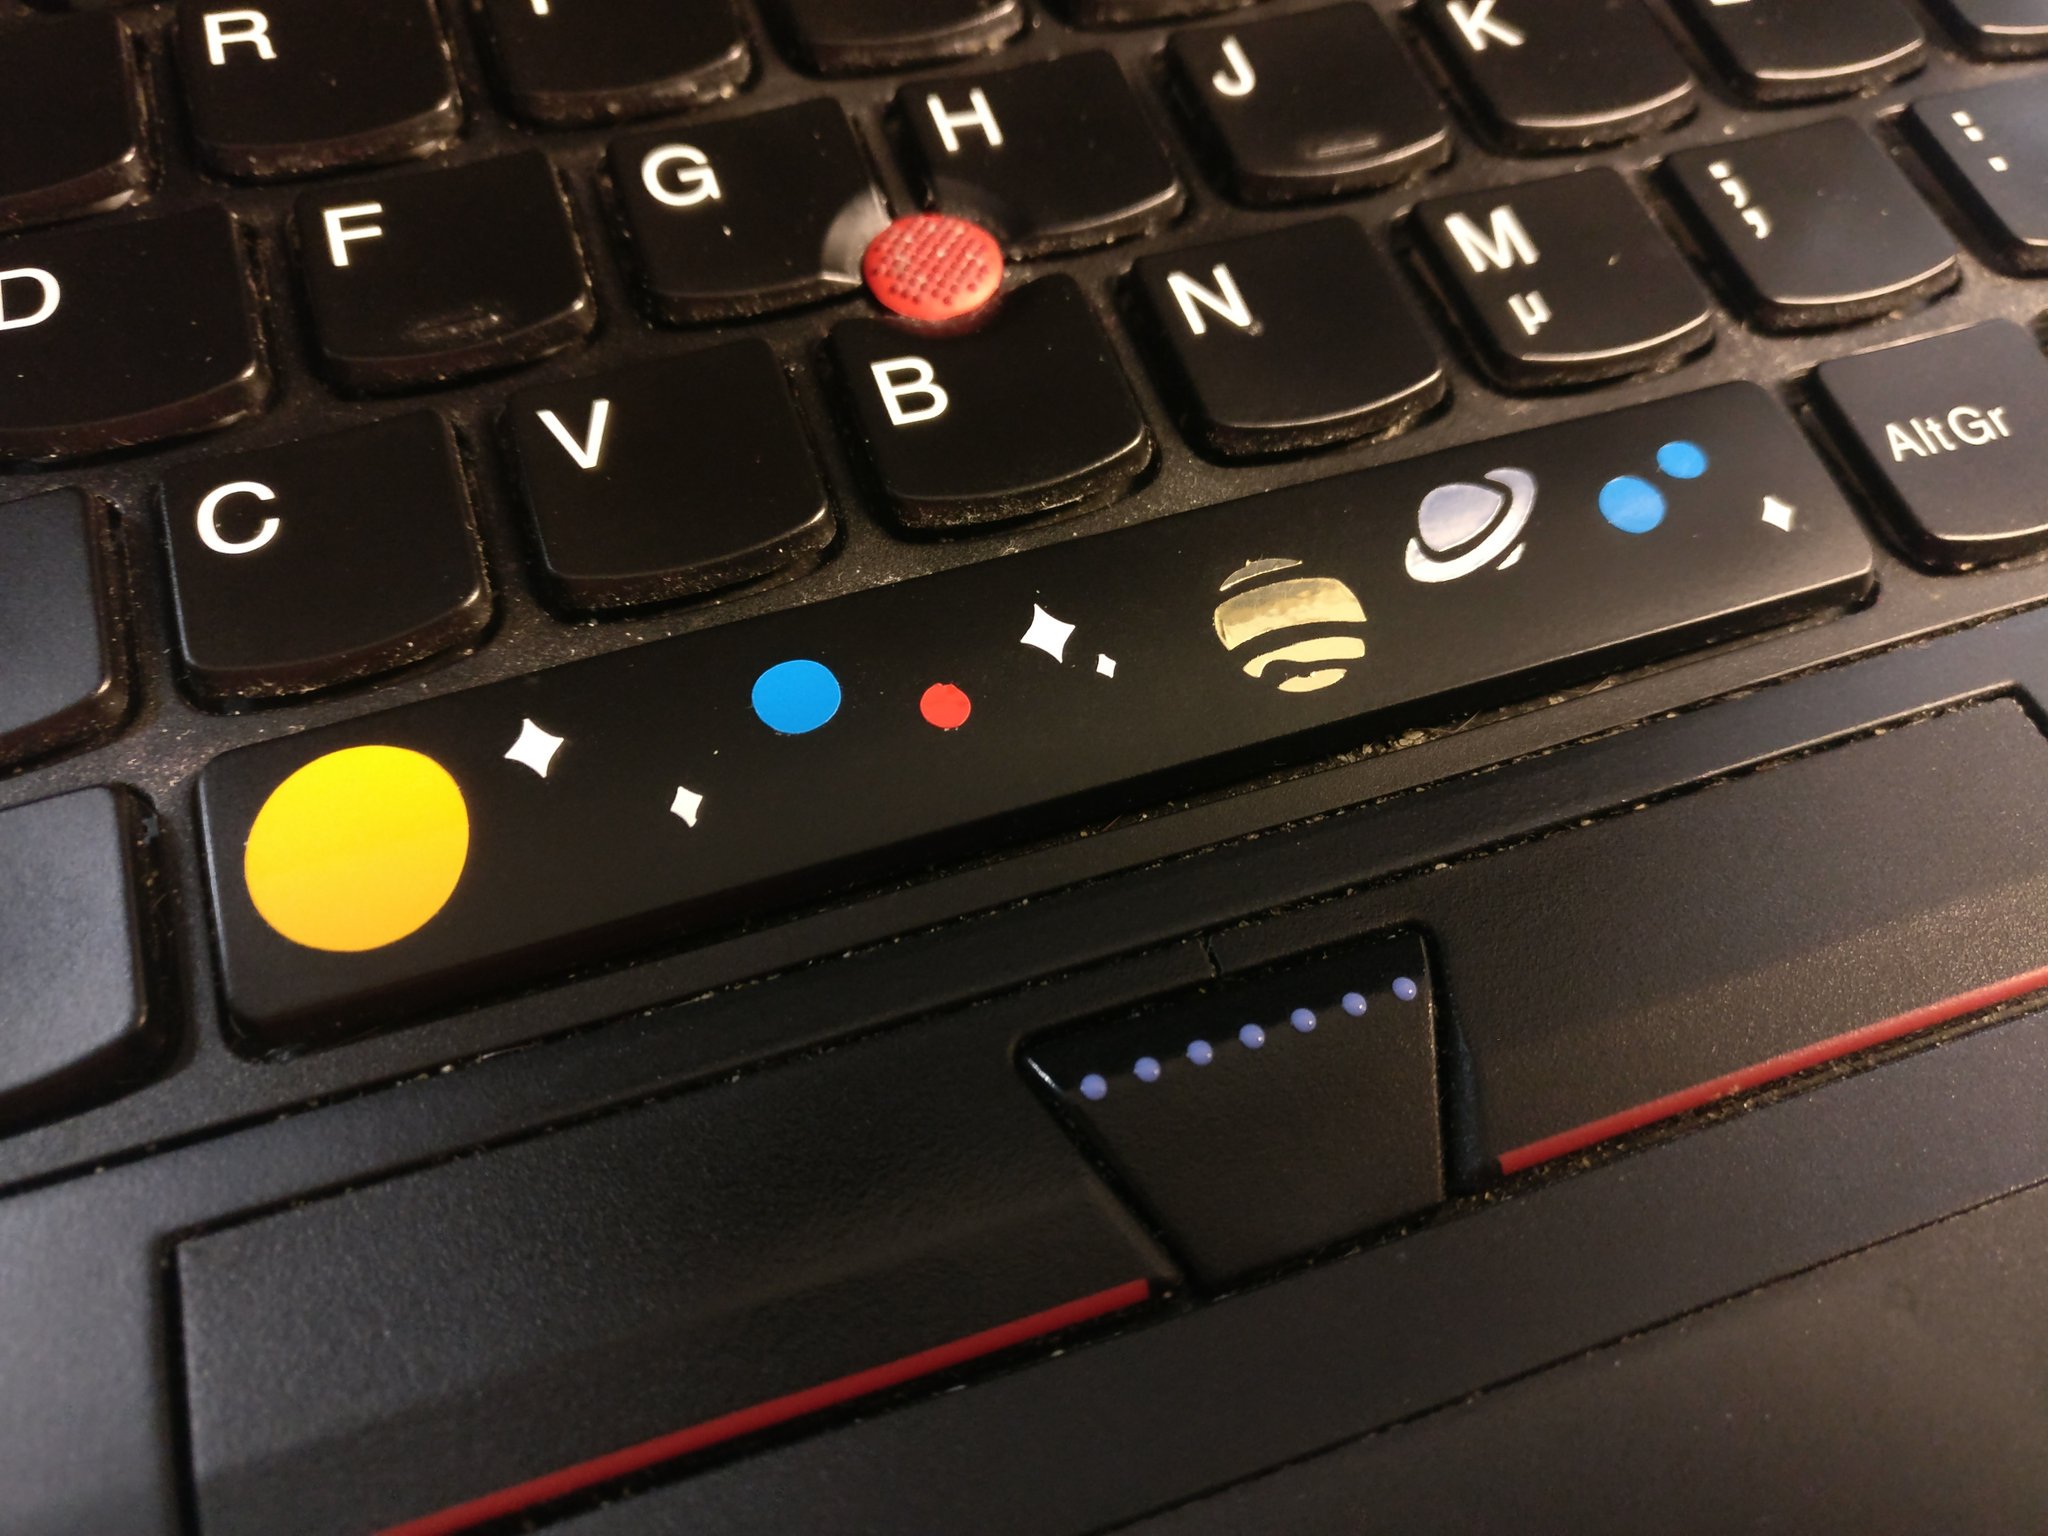 Space bar on a keyboard, with some tiny stars and planets glued on it